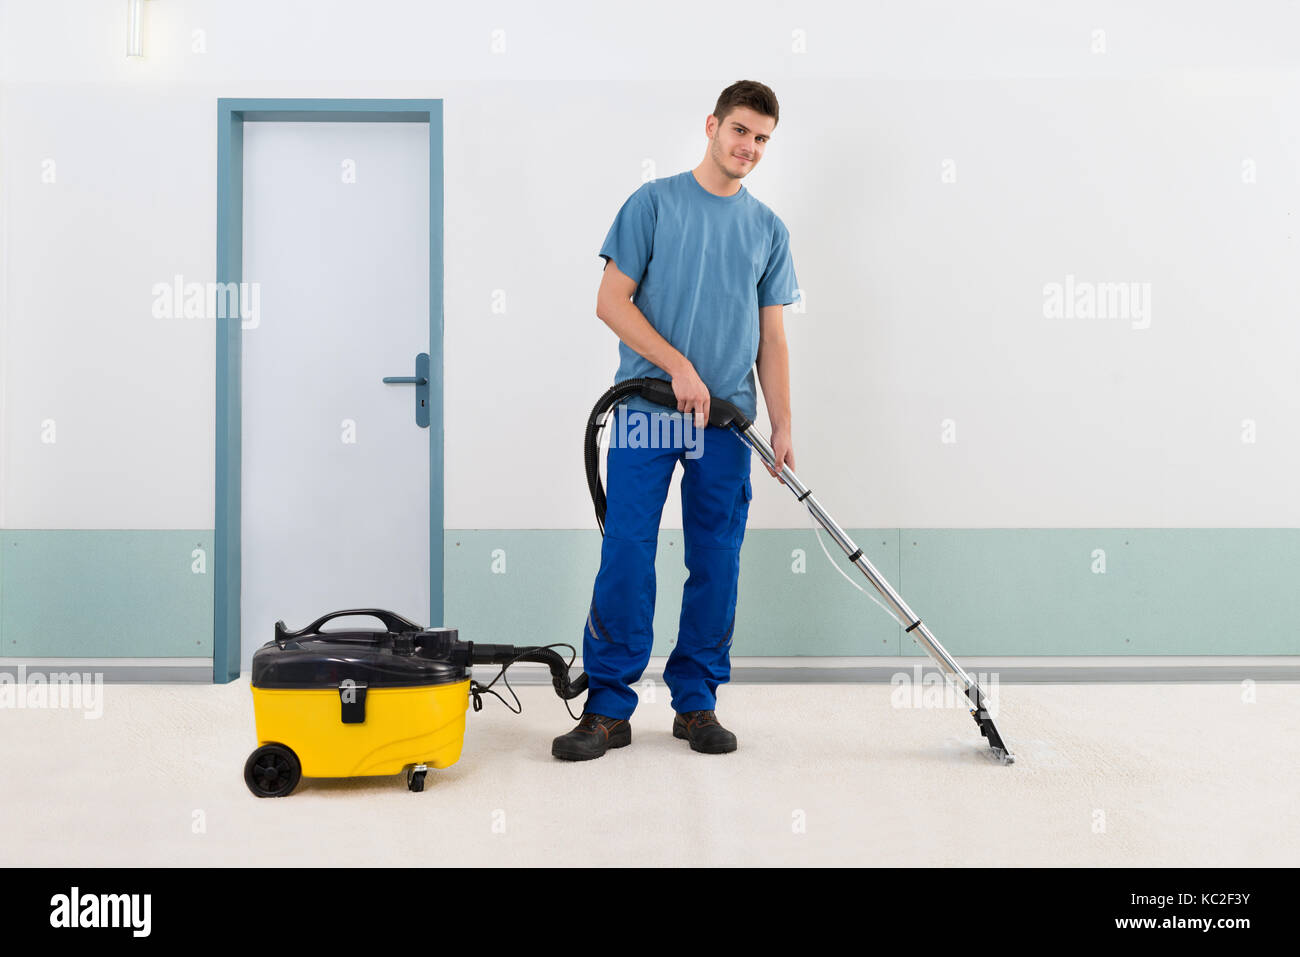 Young Male Cleaner In Uniform Vacuuming Floor Stock Photo